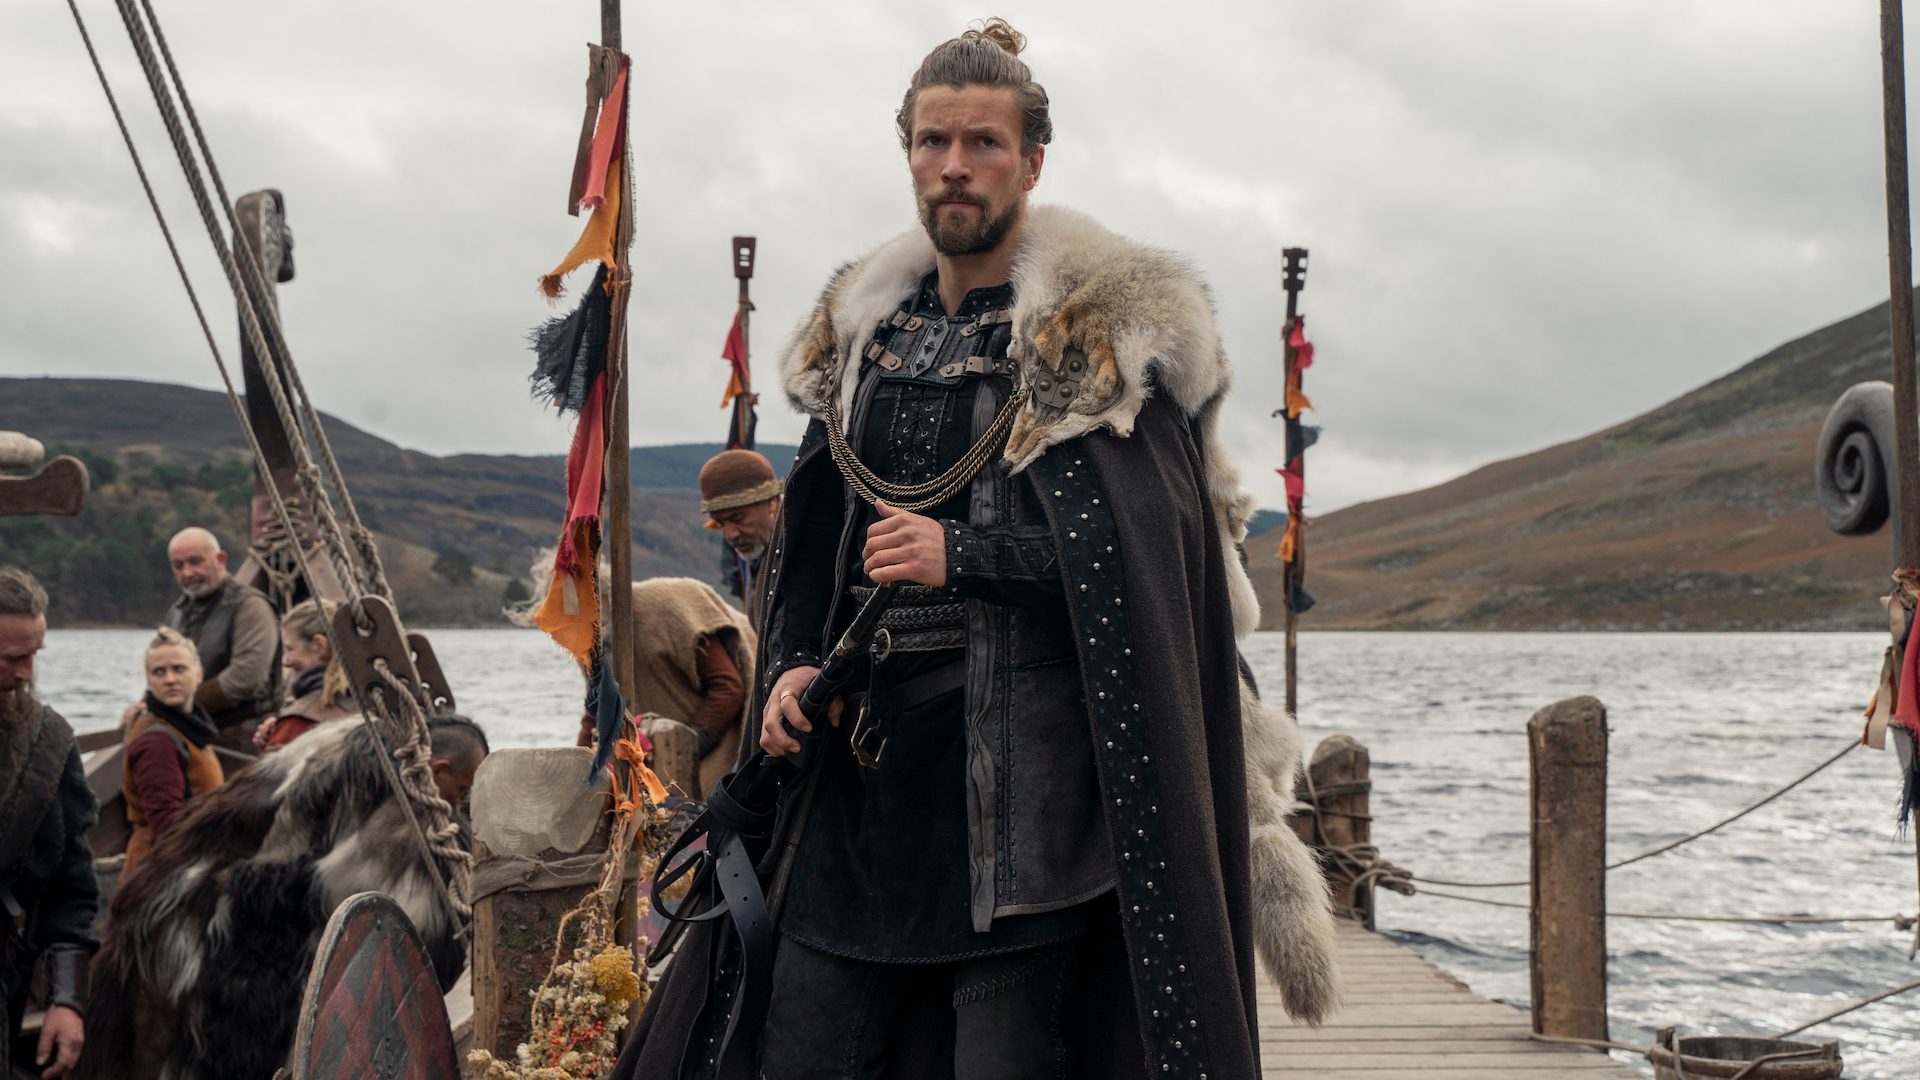 The Vikings are back: ‘Valhalla’ series brings more adventures to screen